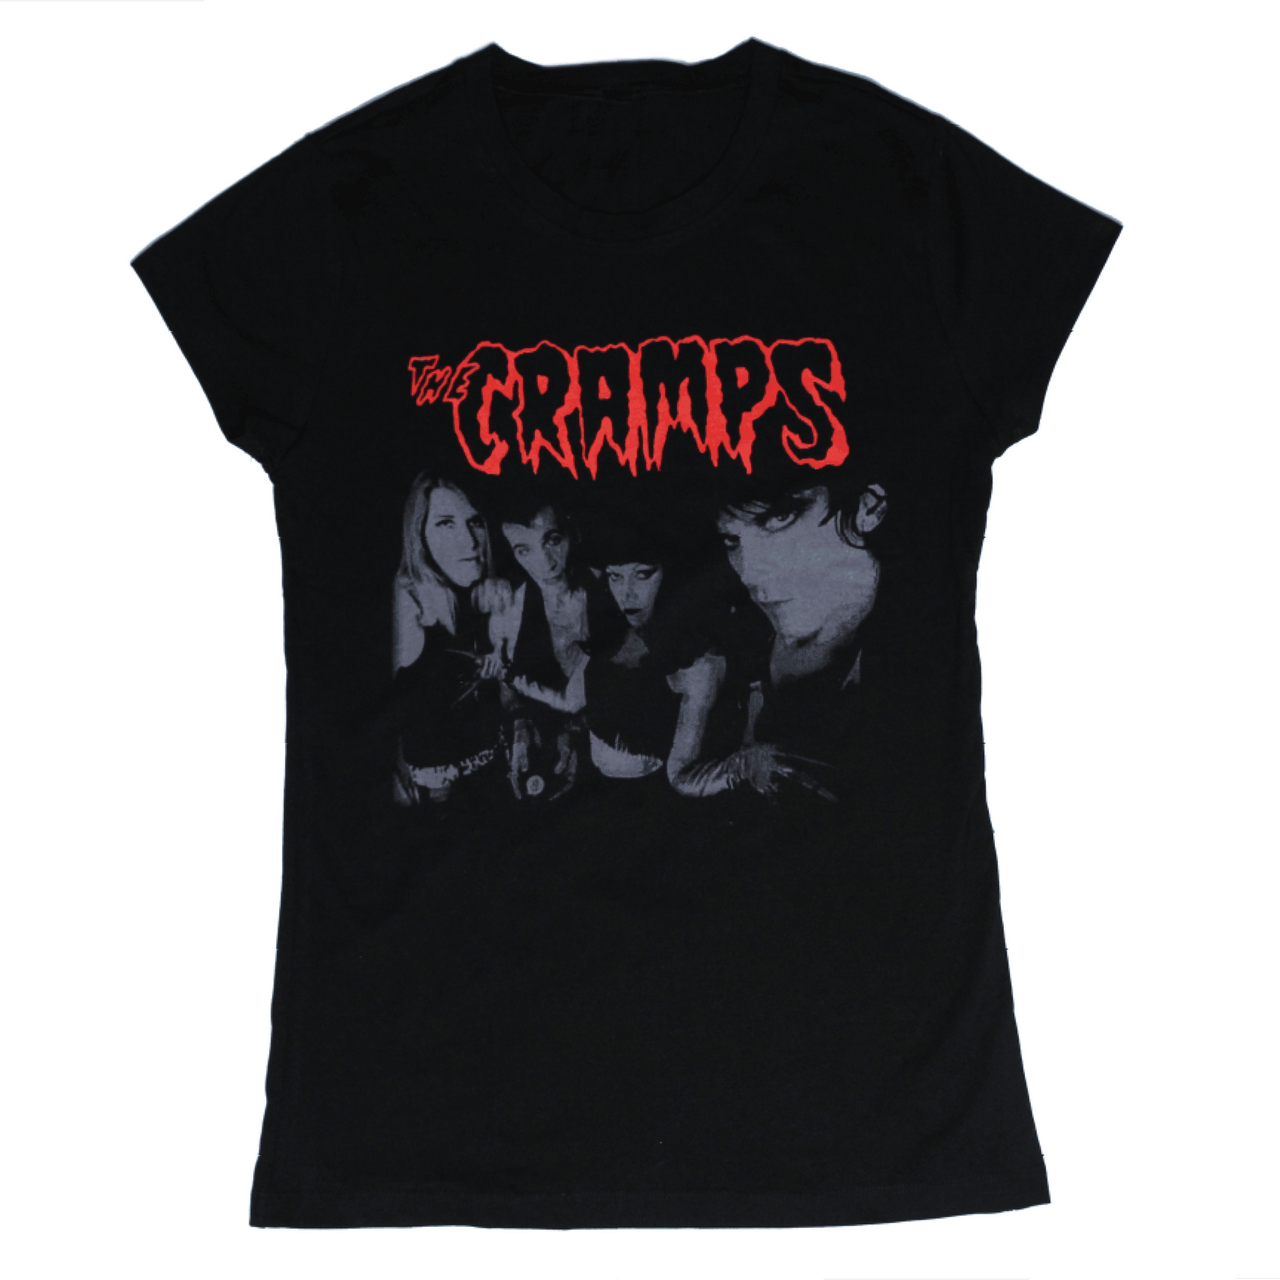 The Cramps Womens Tee